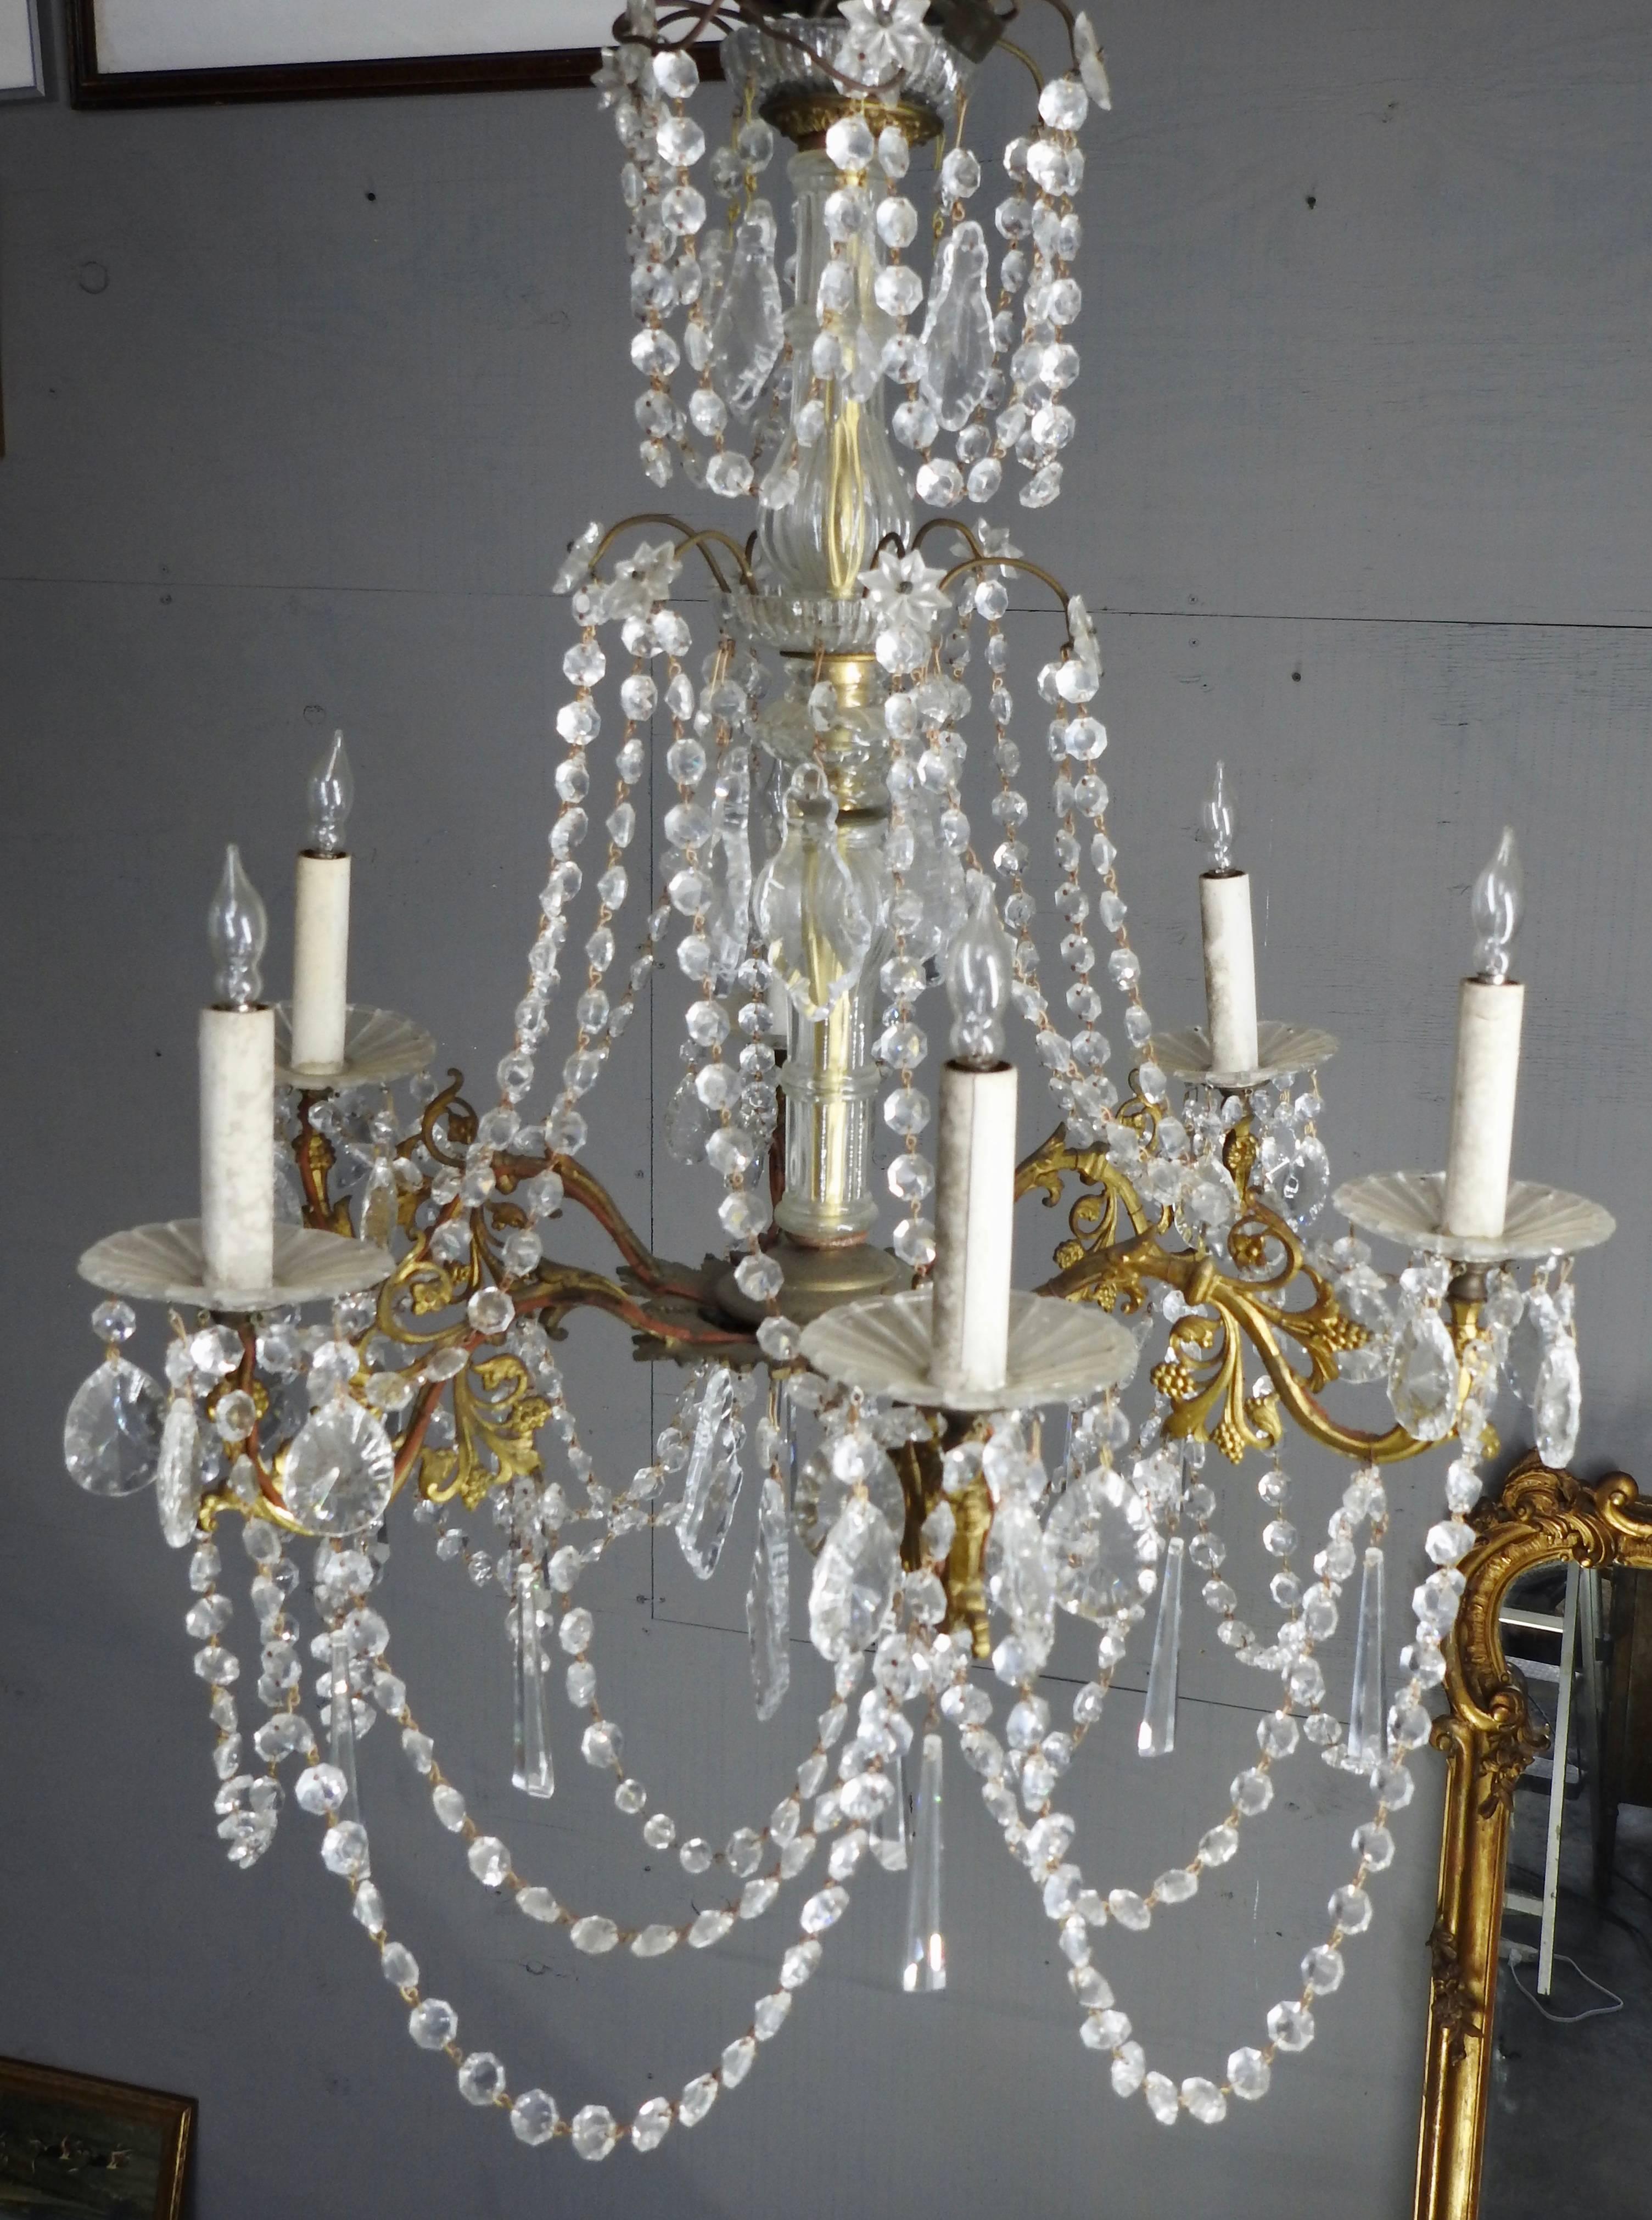 Strands of faceted crystal grace this elegant Country French chandelier. The light fixture is accented with many prisms and crystal bobesches. These are mounted on a bronze fixture featuring leaves and scrollwork. This chandelier was completely